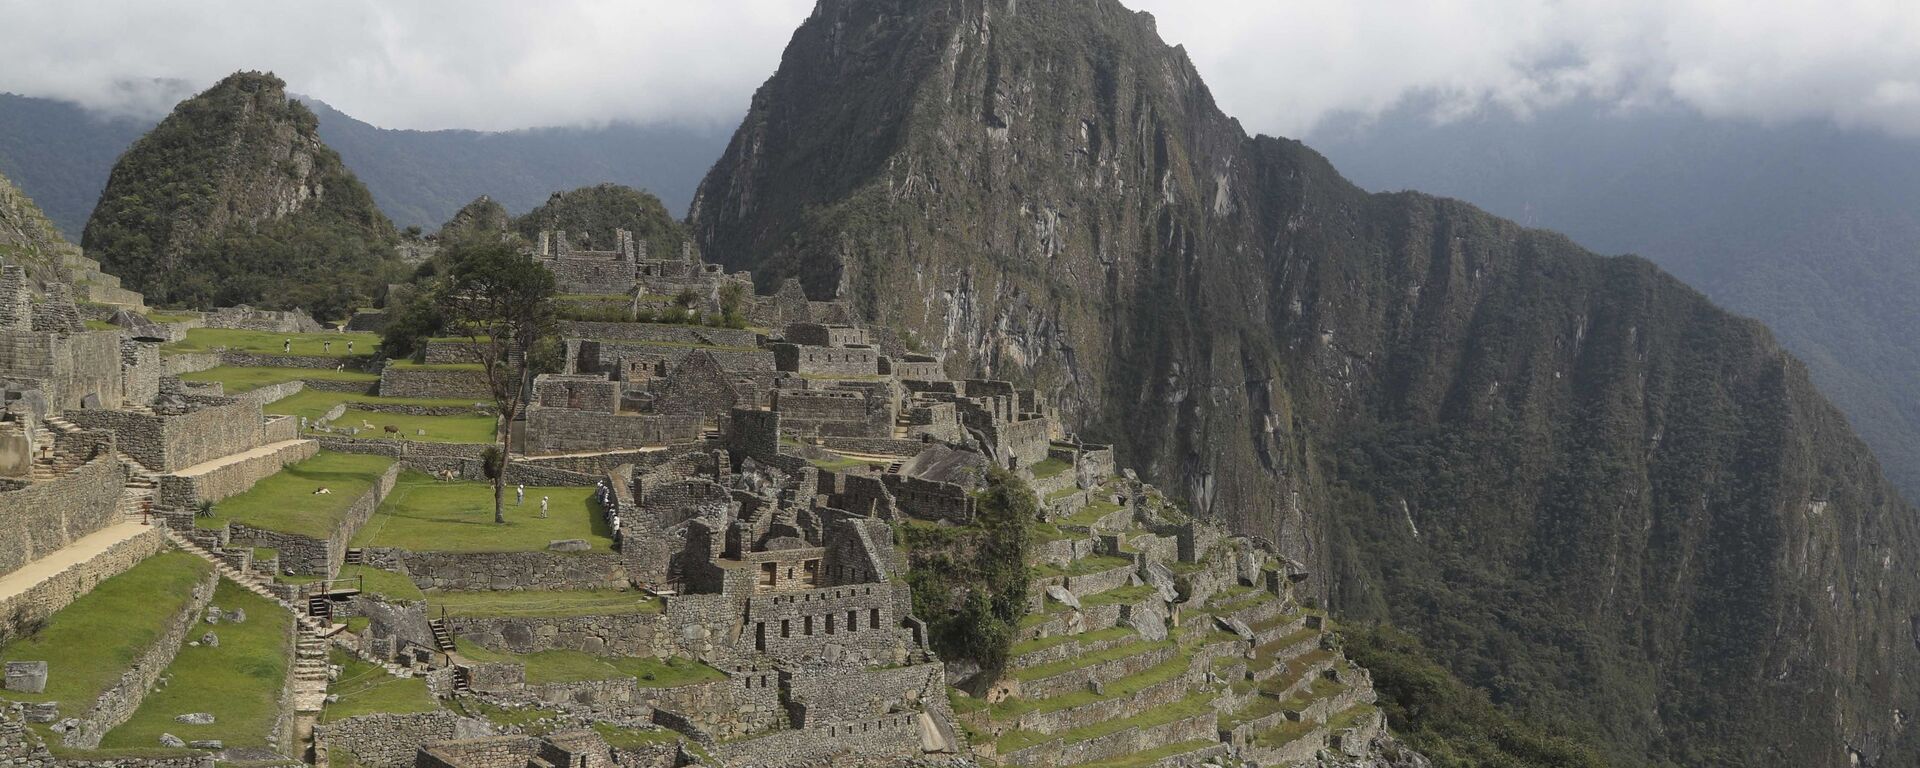 The Machu Picchu archeological site is devoid of tourists while it's closed amid the COVID-19 pandemic, in the department of Cusco, Peru, Tuesday, Oct. 27, 2020. Currently open to maintenance workers only, the world-renown Incan citadel of Machu Picchu will reopen to the public on Nov. 1. (AP Photo/Martin Mejia) - Sputnik International, 1920, 21.01.2023